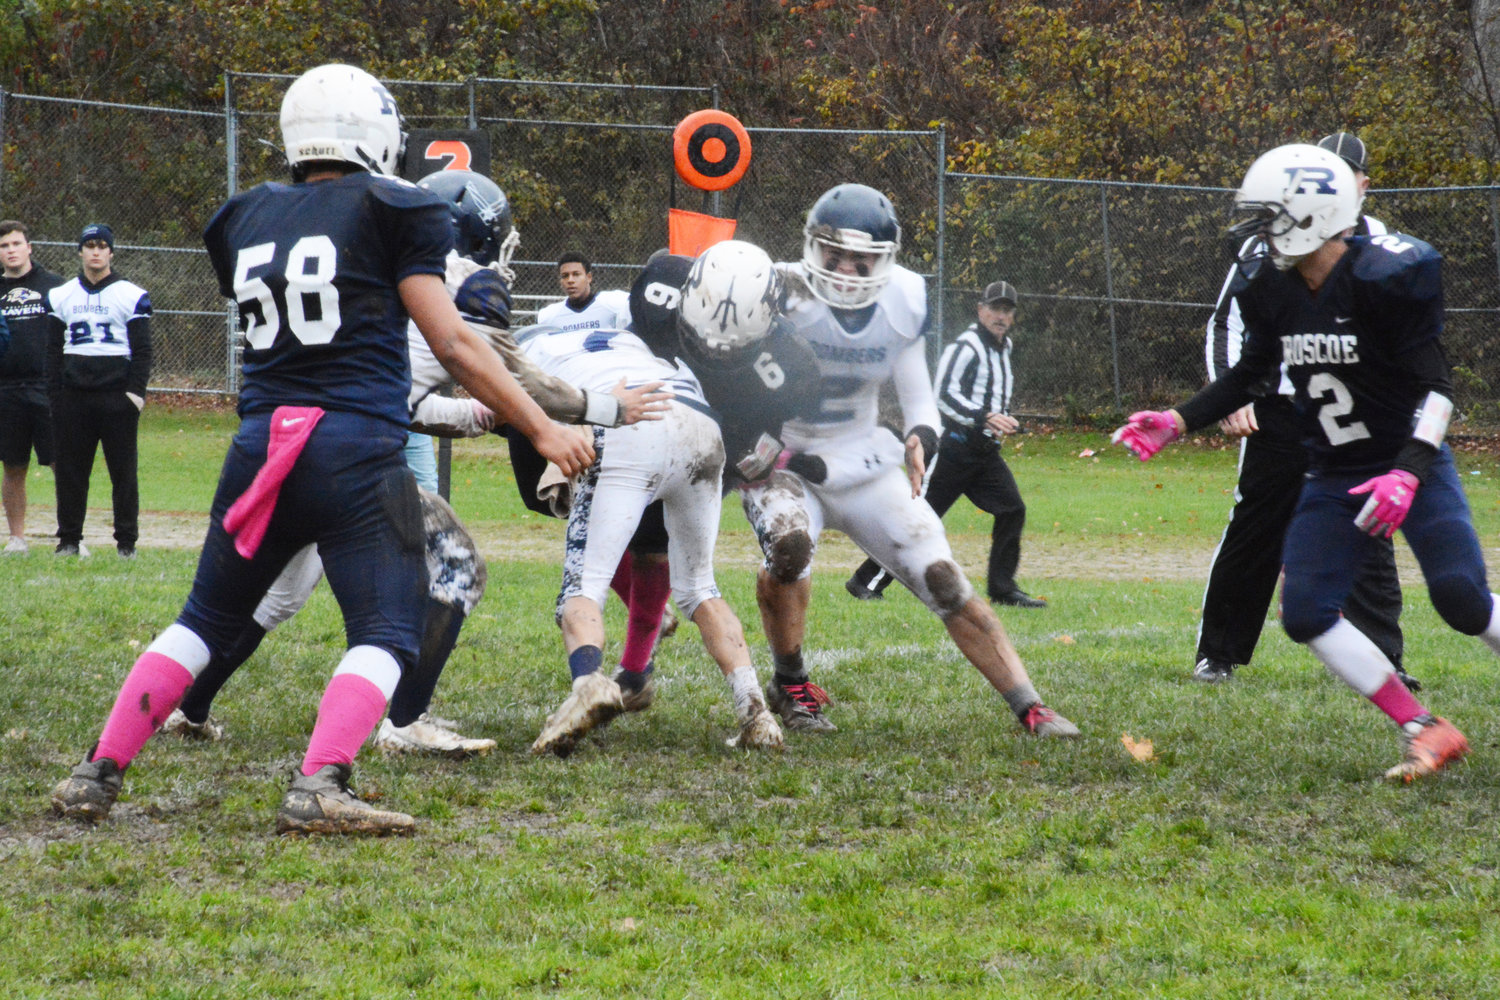 Alaniz Ruiz fights through contact as he pushes the line for a positive gain. Ruiz rushed and received a touchdown in Saturday’s playoff matchup against Pine Plains, earning 148 yards on offense as well as six tackles on defense.